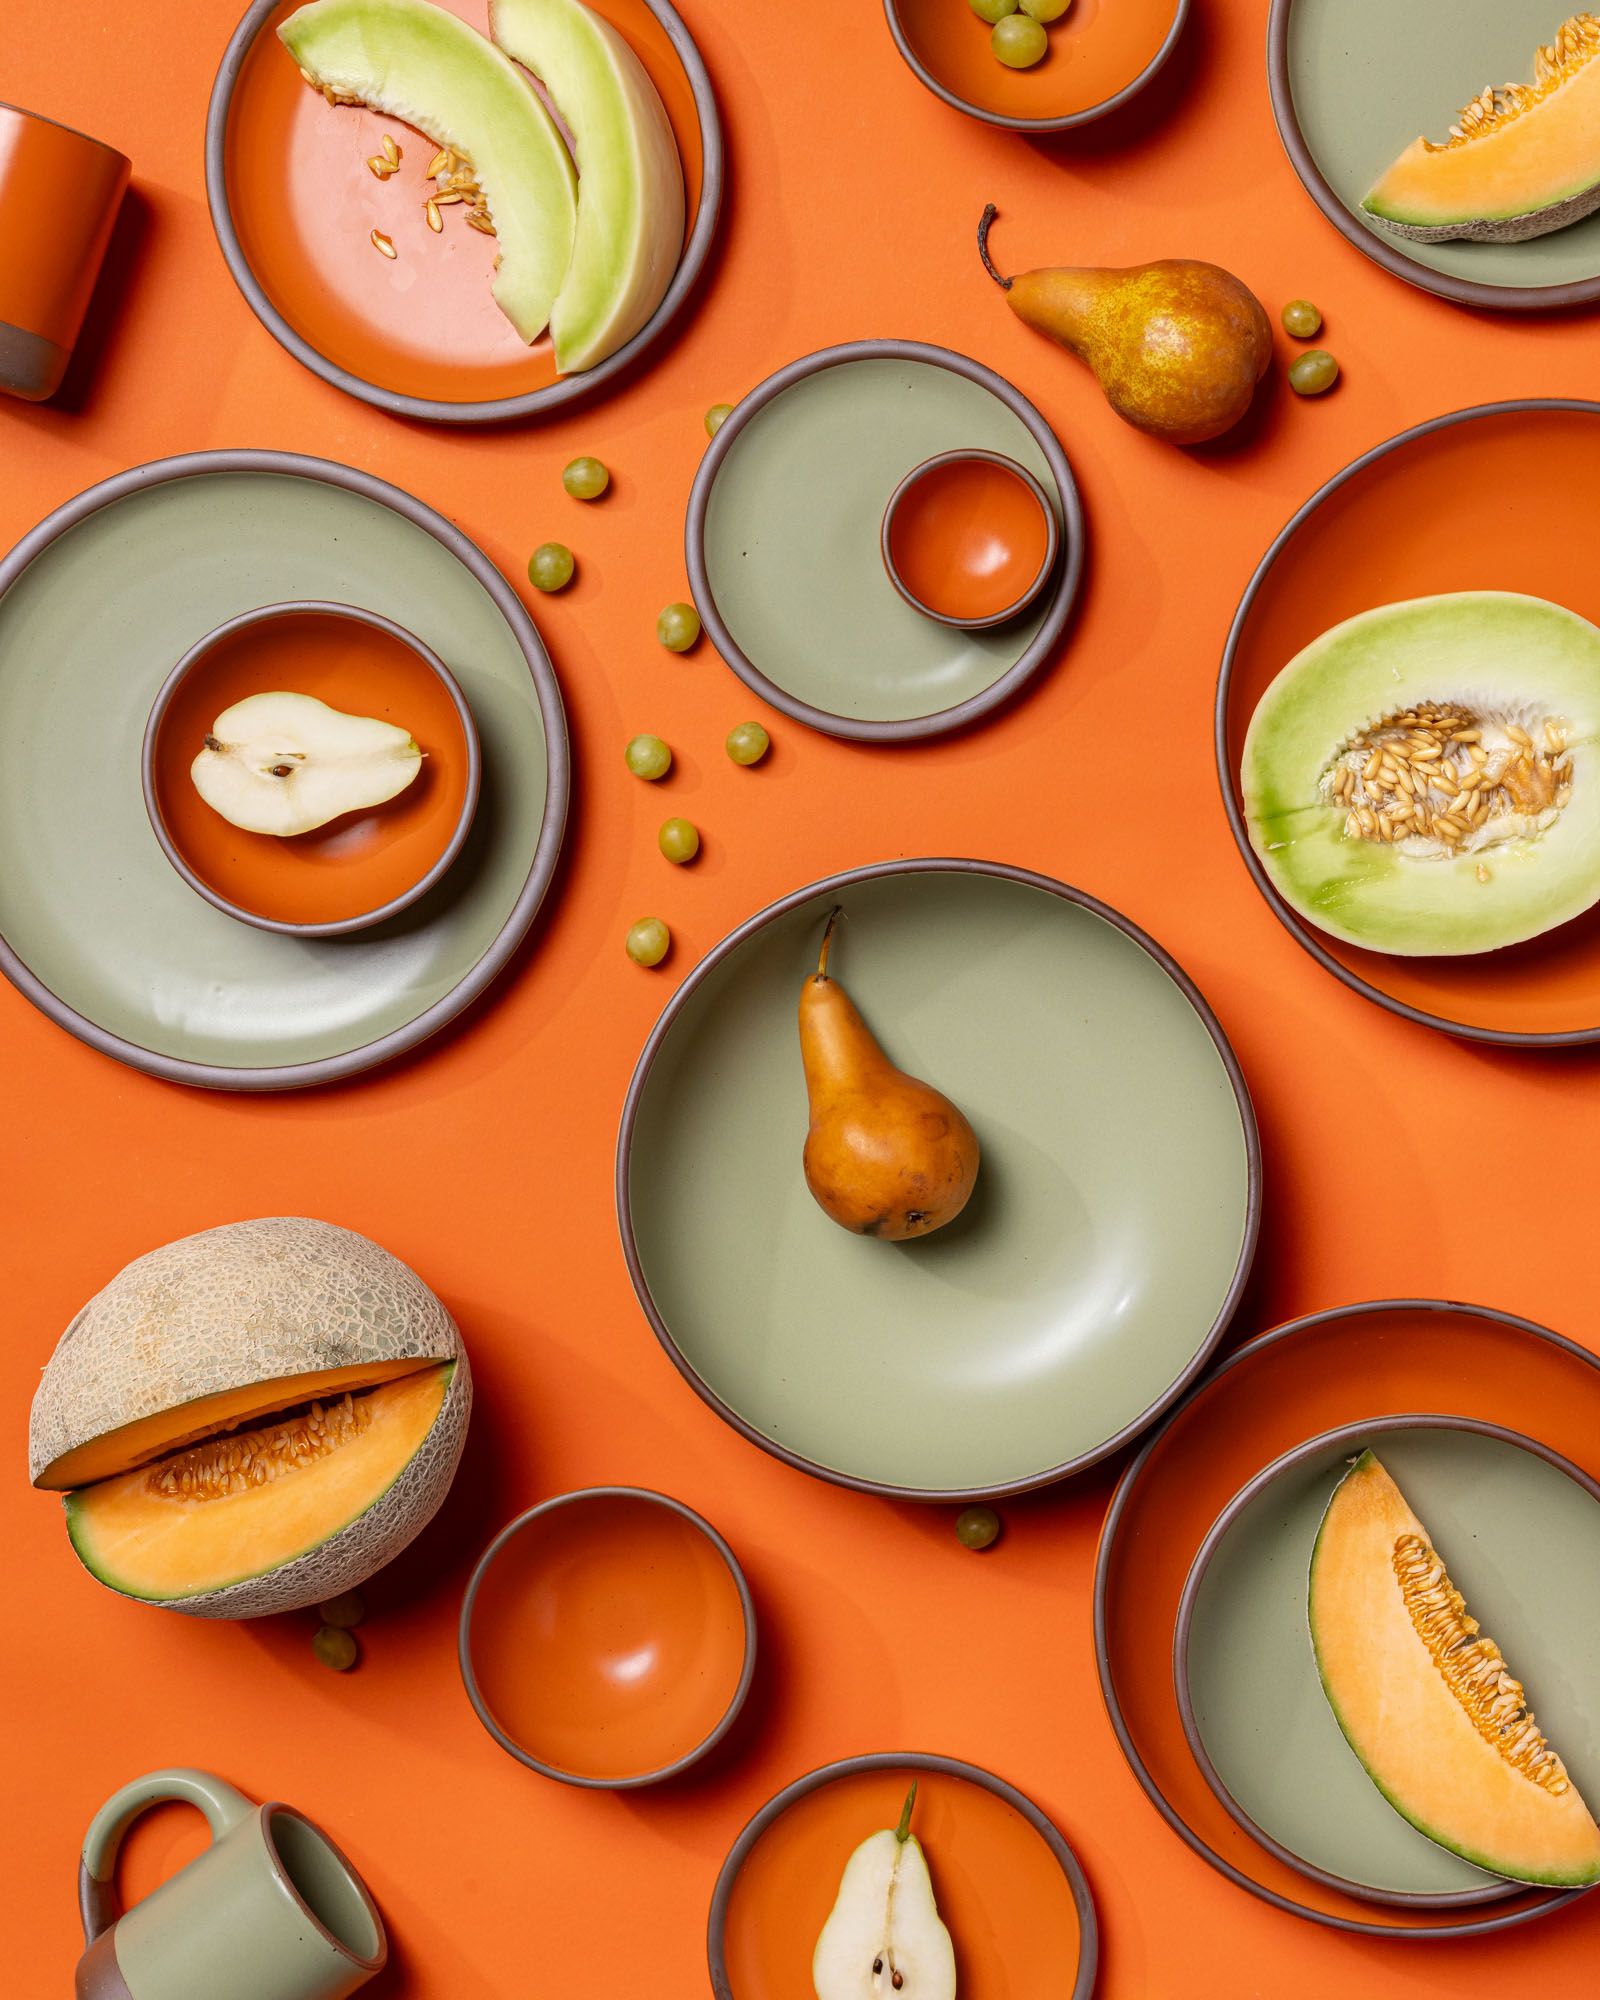 Ceramic plates and bowls in sage green and bold orange are artfully arranged together with different fruits in similar colors against a bold orange background.